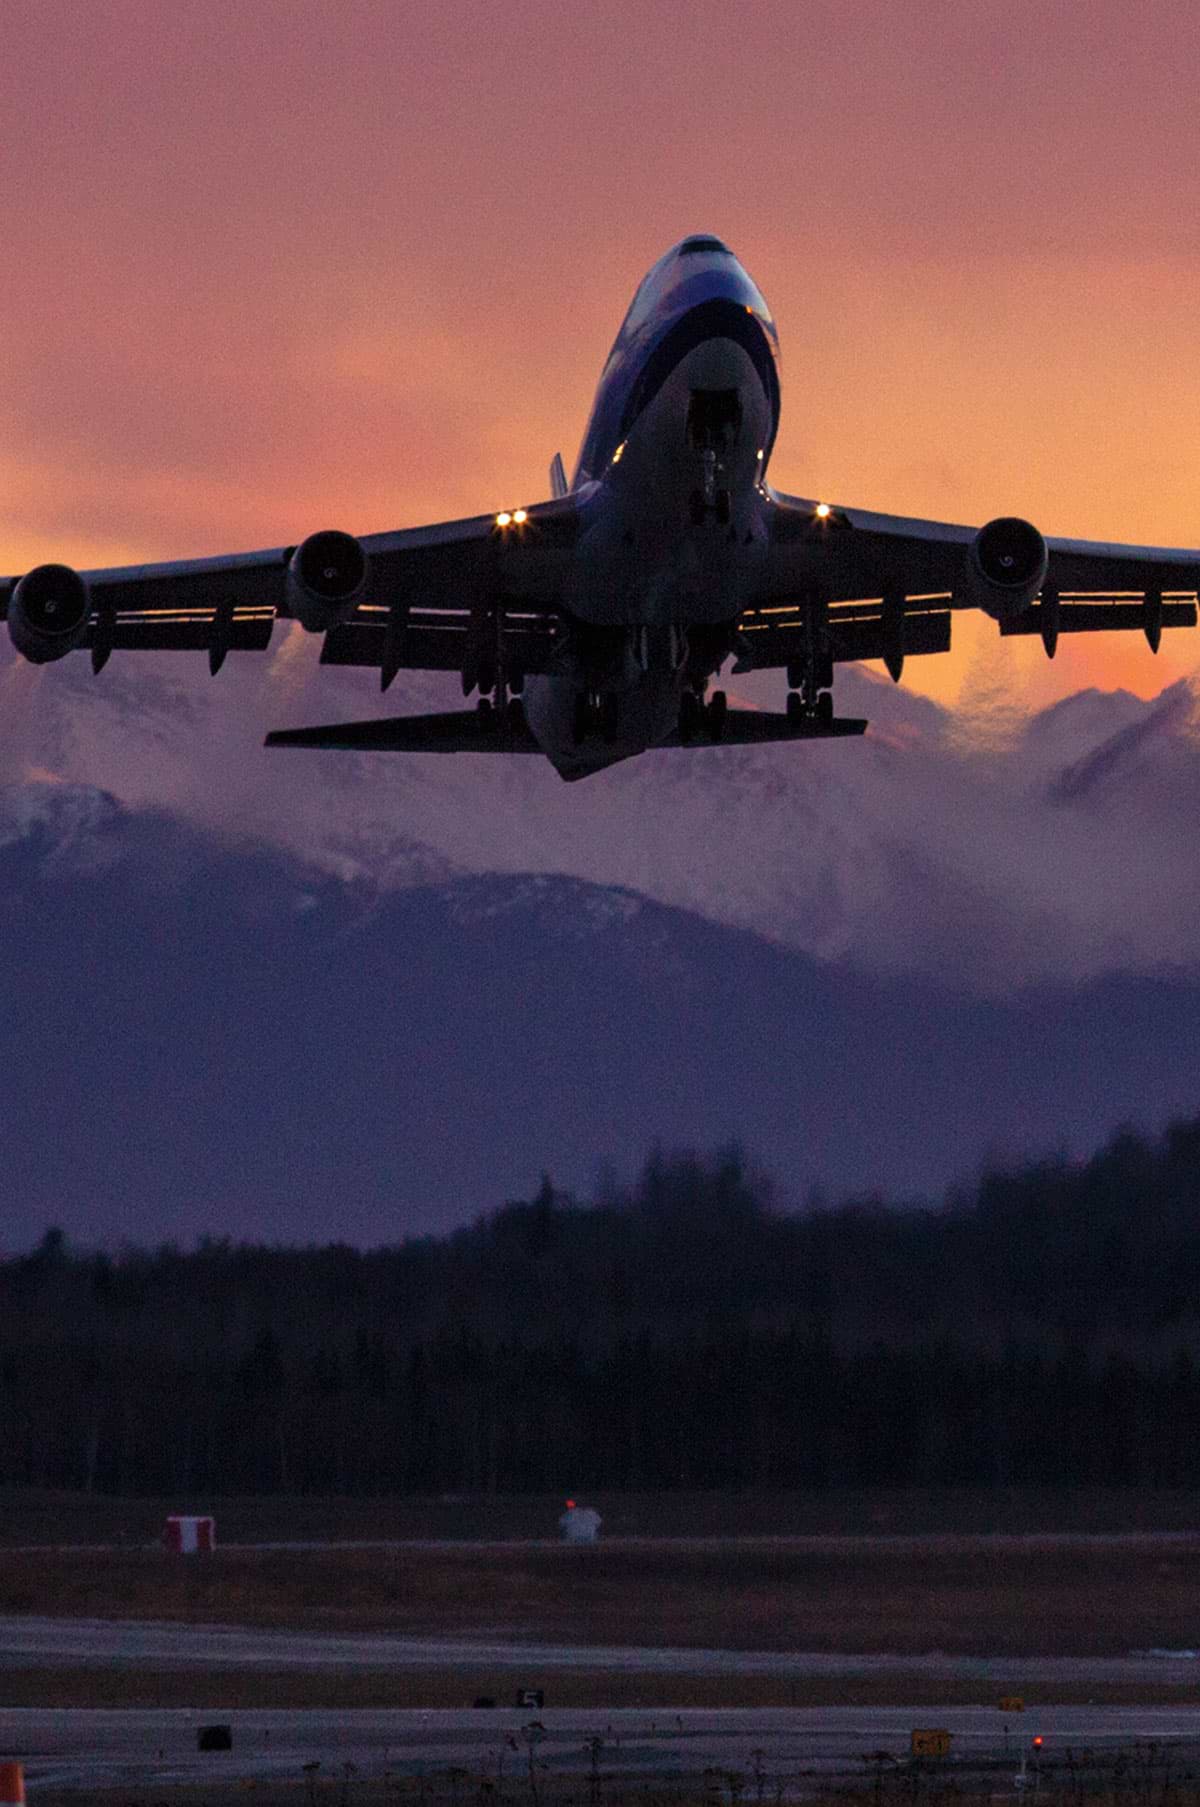 Plane taking off on the runway